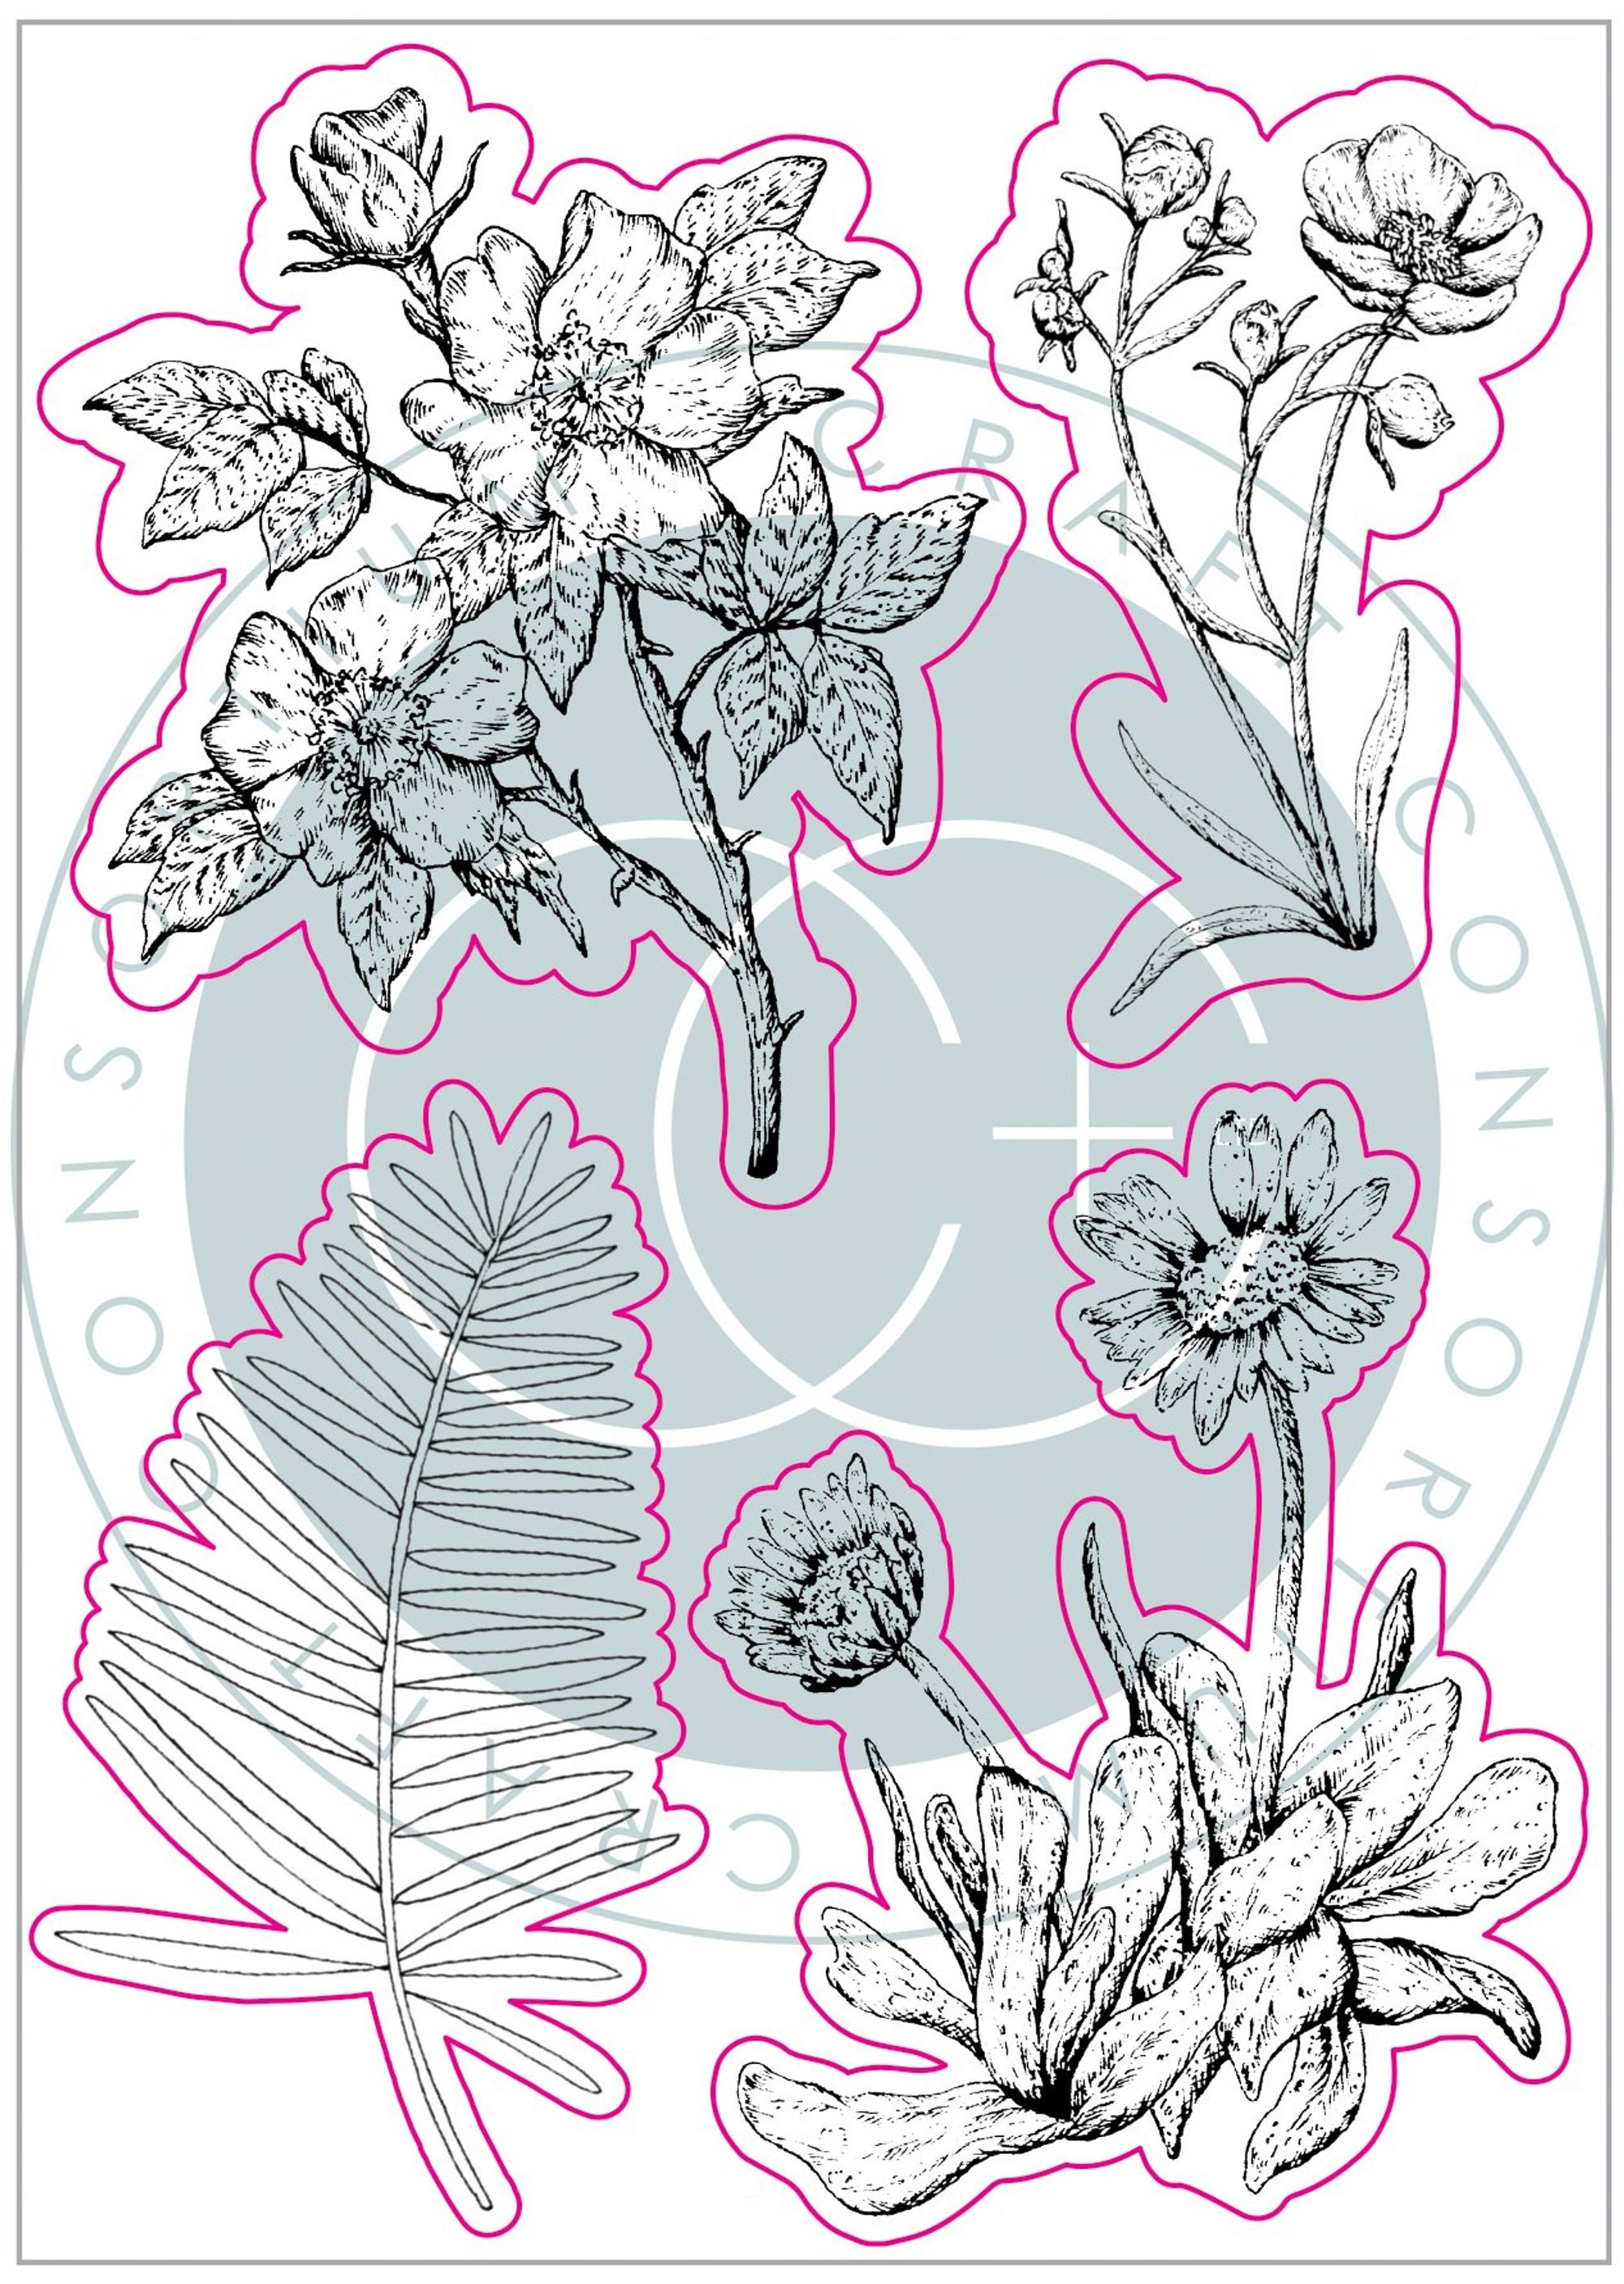 At home in the wildflowers - Stamp Set - Flora